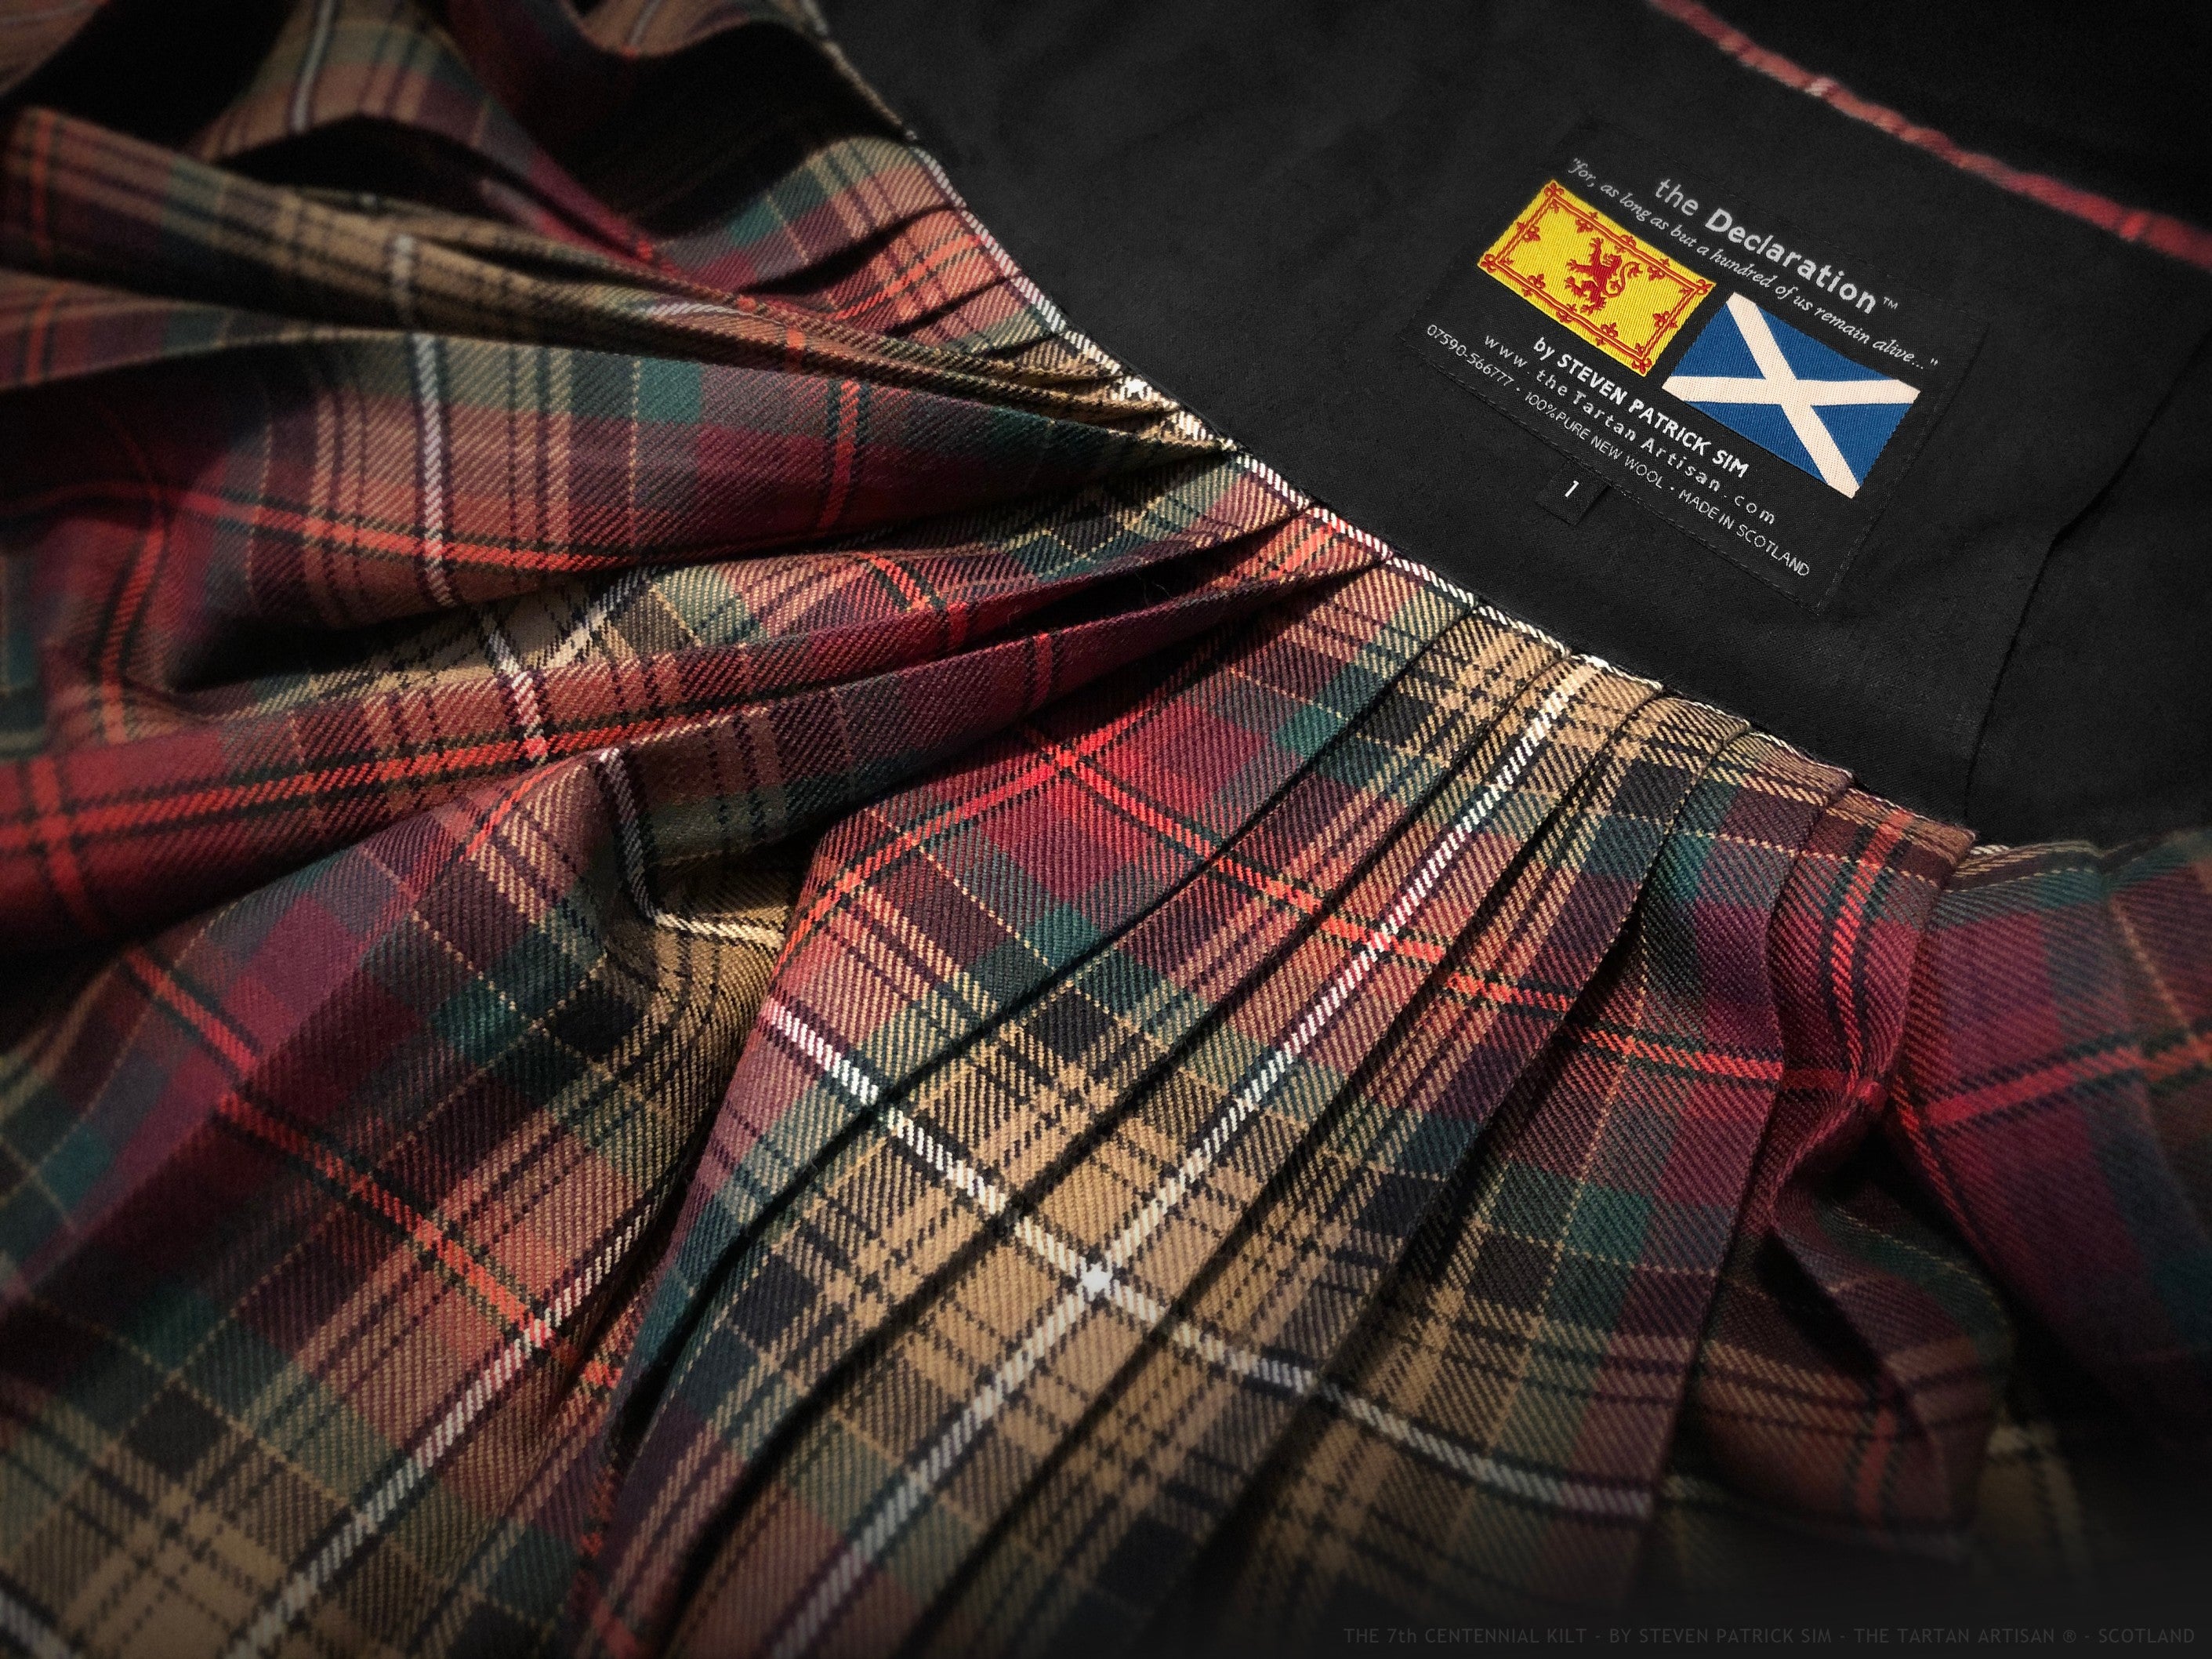 Declaration of Arbroath 7th Centennial Kilt - "for, as long as a hundred of us remain alive"